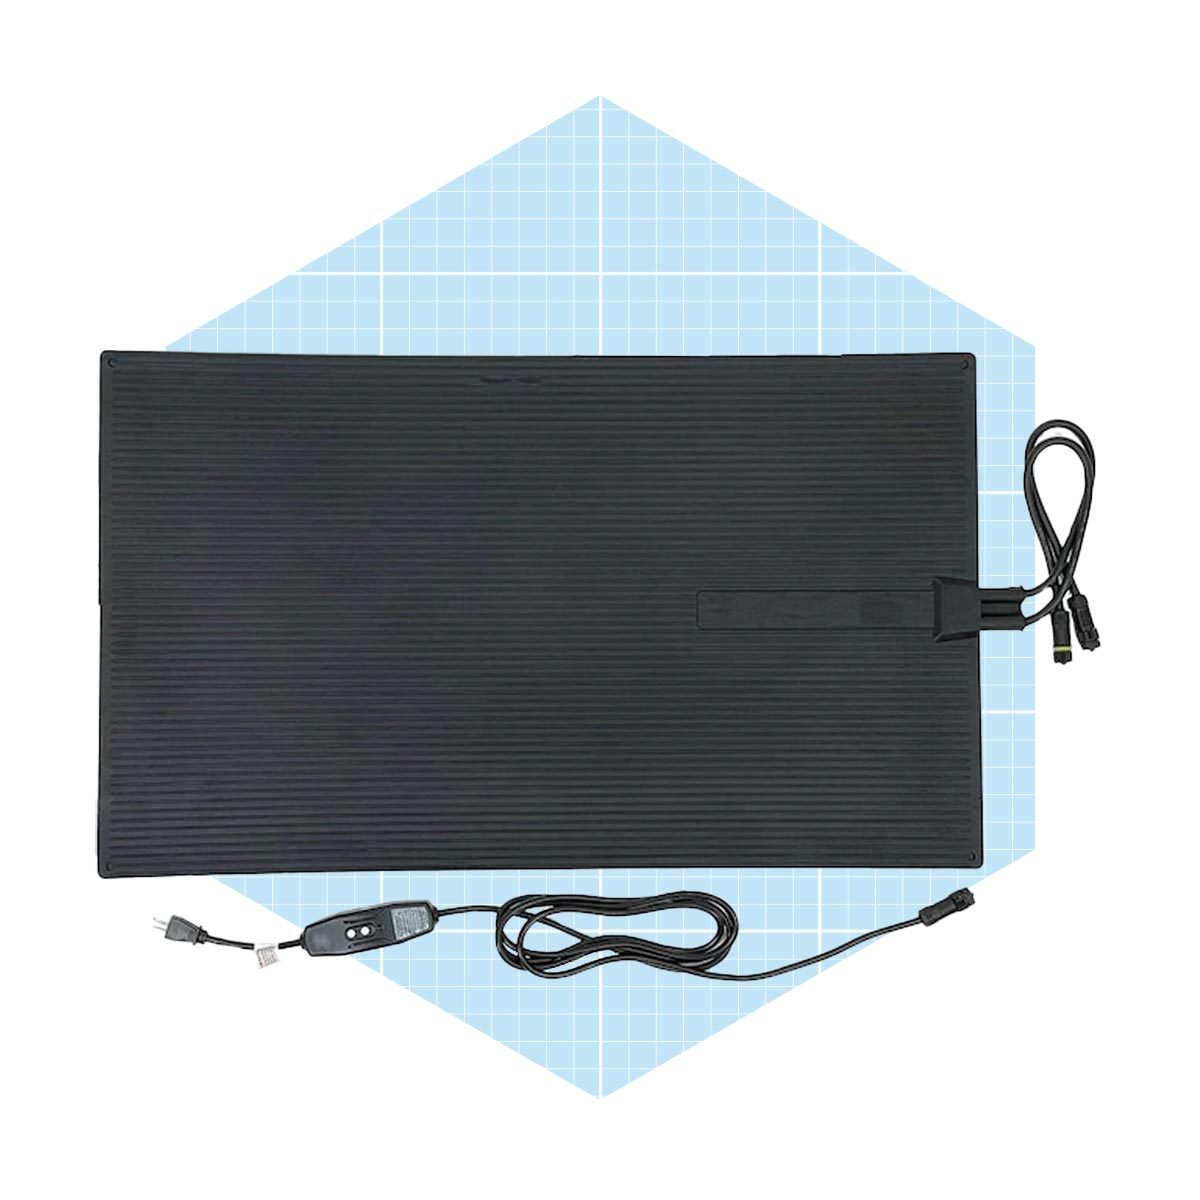 Dr Infrared Heater Outdoor Heated Safety Mat